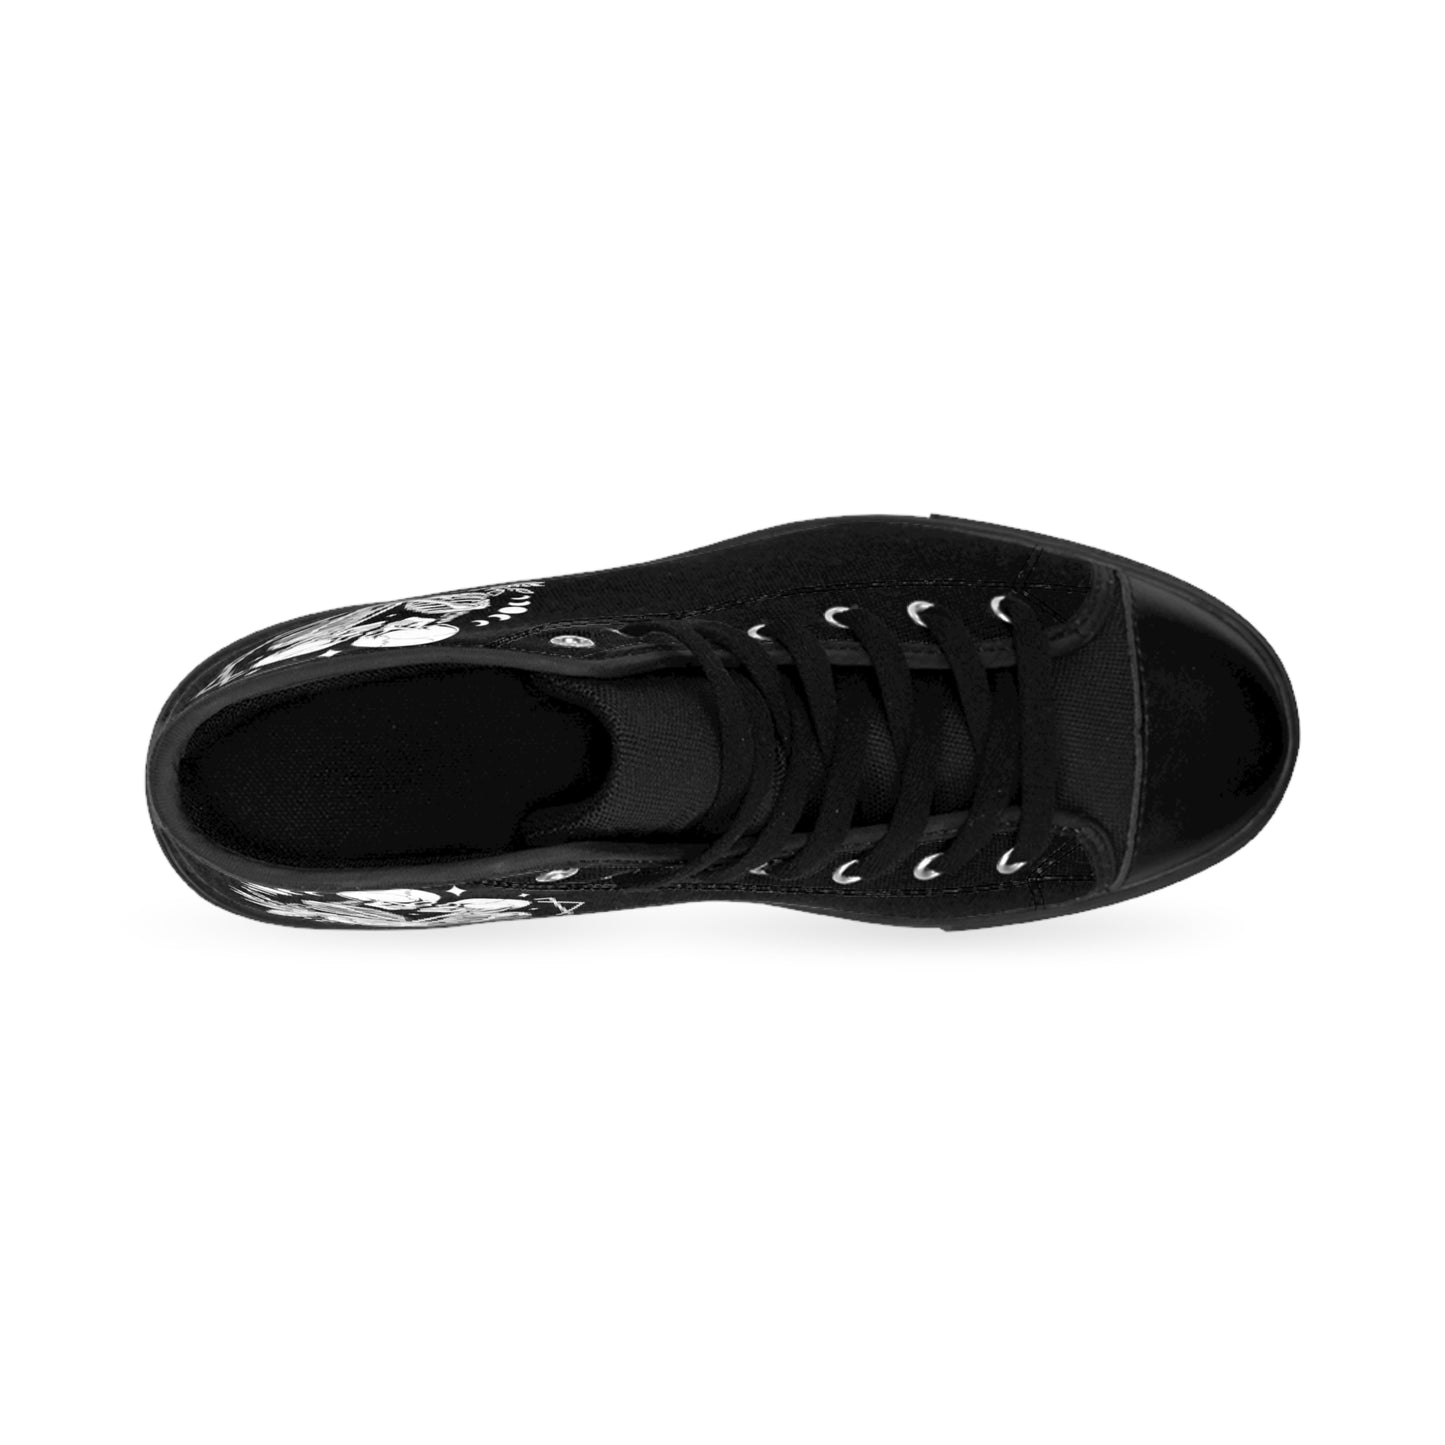 The Lovers Moon Eclipse Women's Classic Sneakers